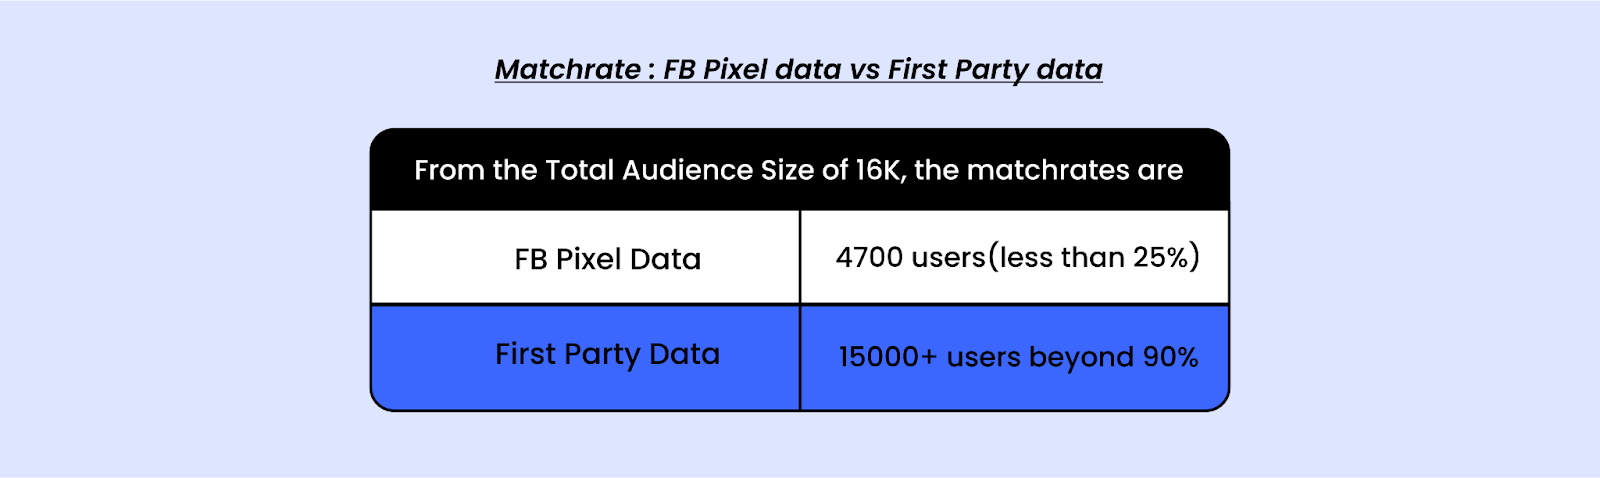 First party data match rate is better than Facebook pixel data 